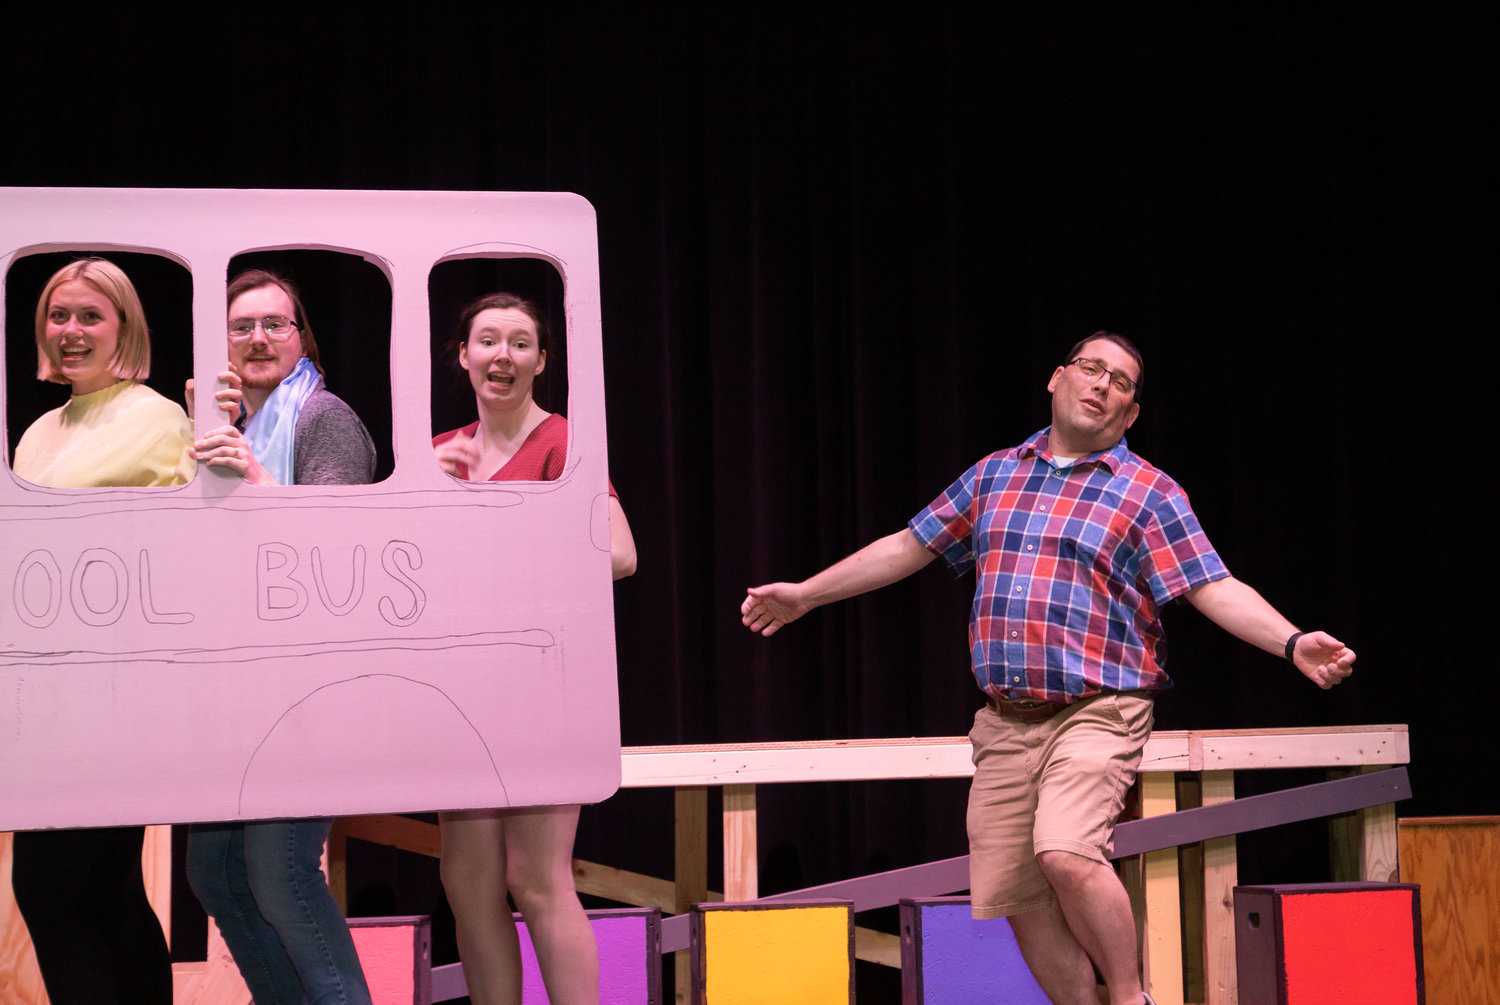 Charlie Brown (Ian Linenfelser) runs behind the school bus while Lucy (Abigail Klinkerman), Linus (Nate Gard) and Sally (Camille Blanford) ride.